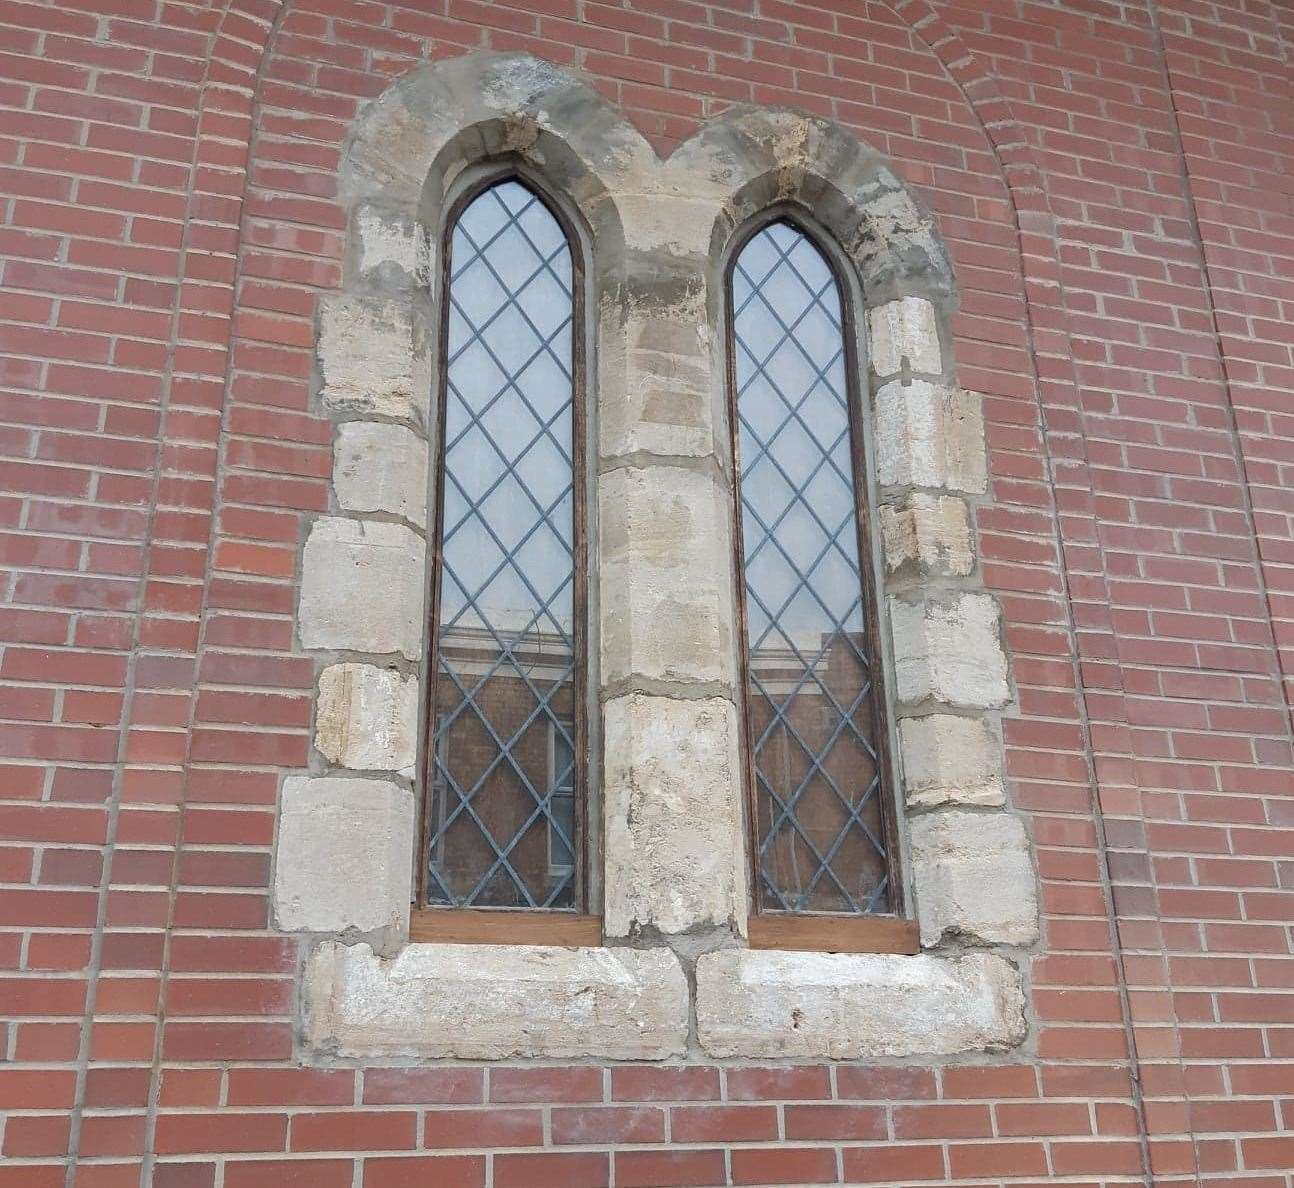 Historic glass windows from when the site was a convent have been retained at Aldi in Deal